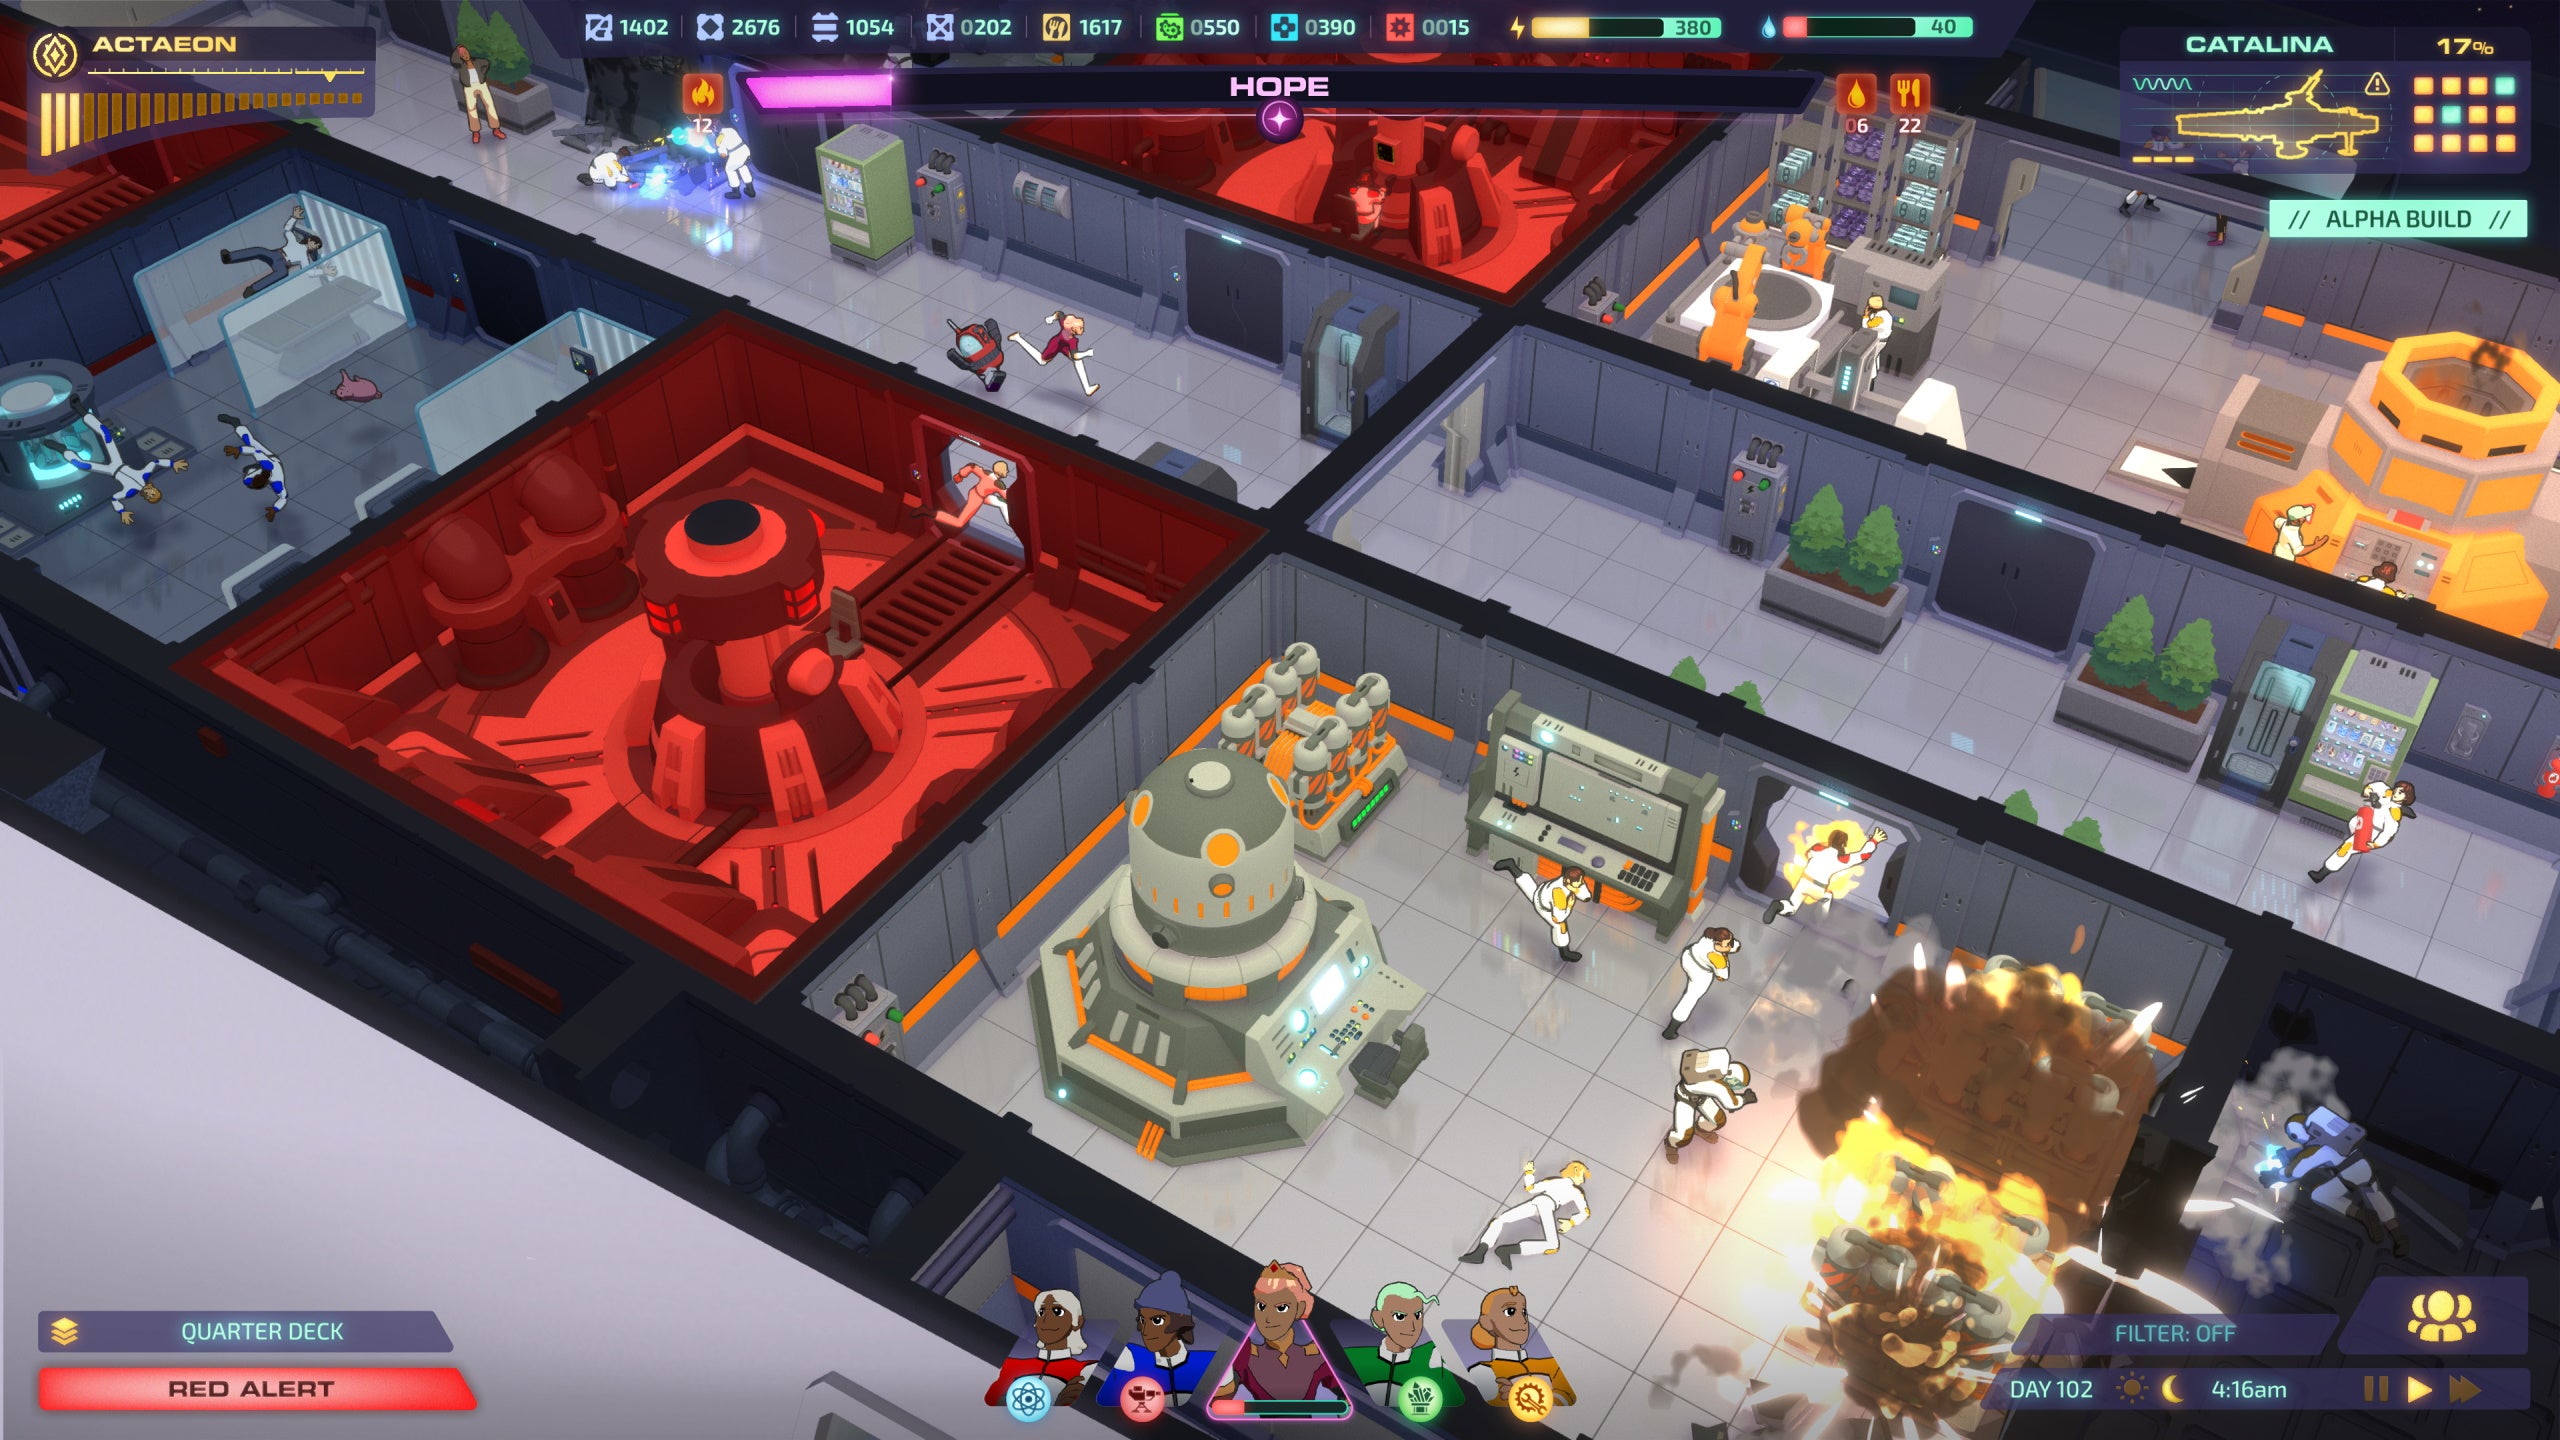 Several rooms are under attack in Jumplight Odyssey